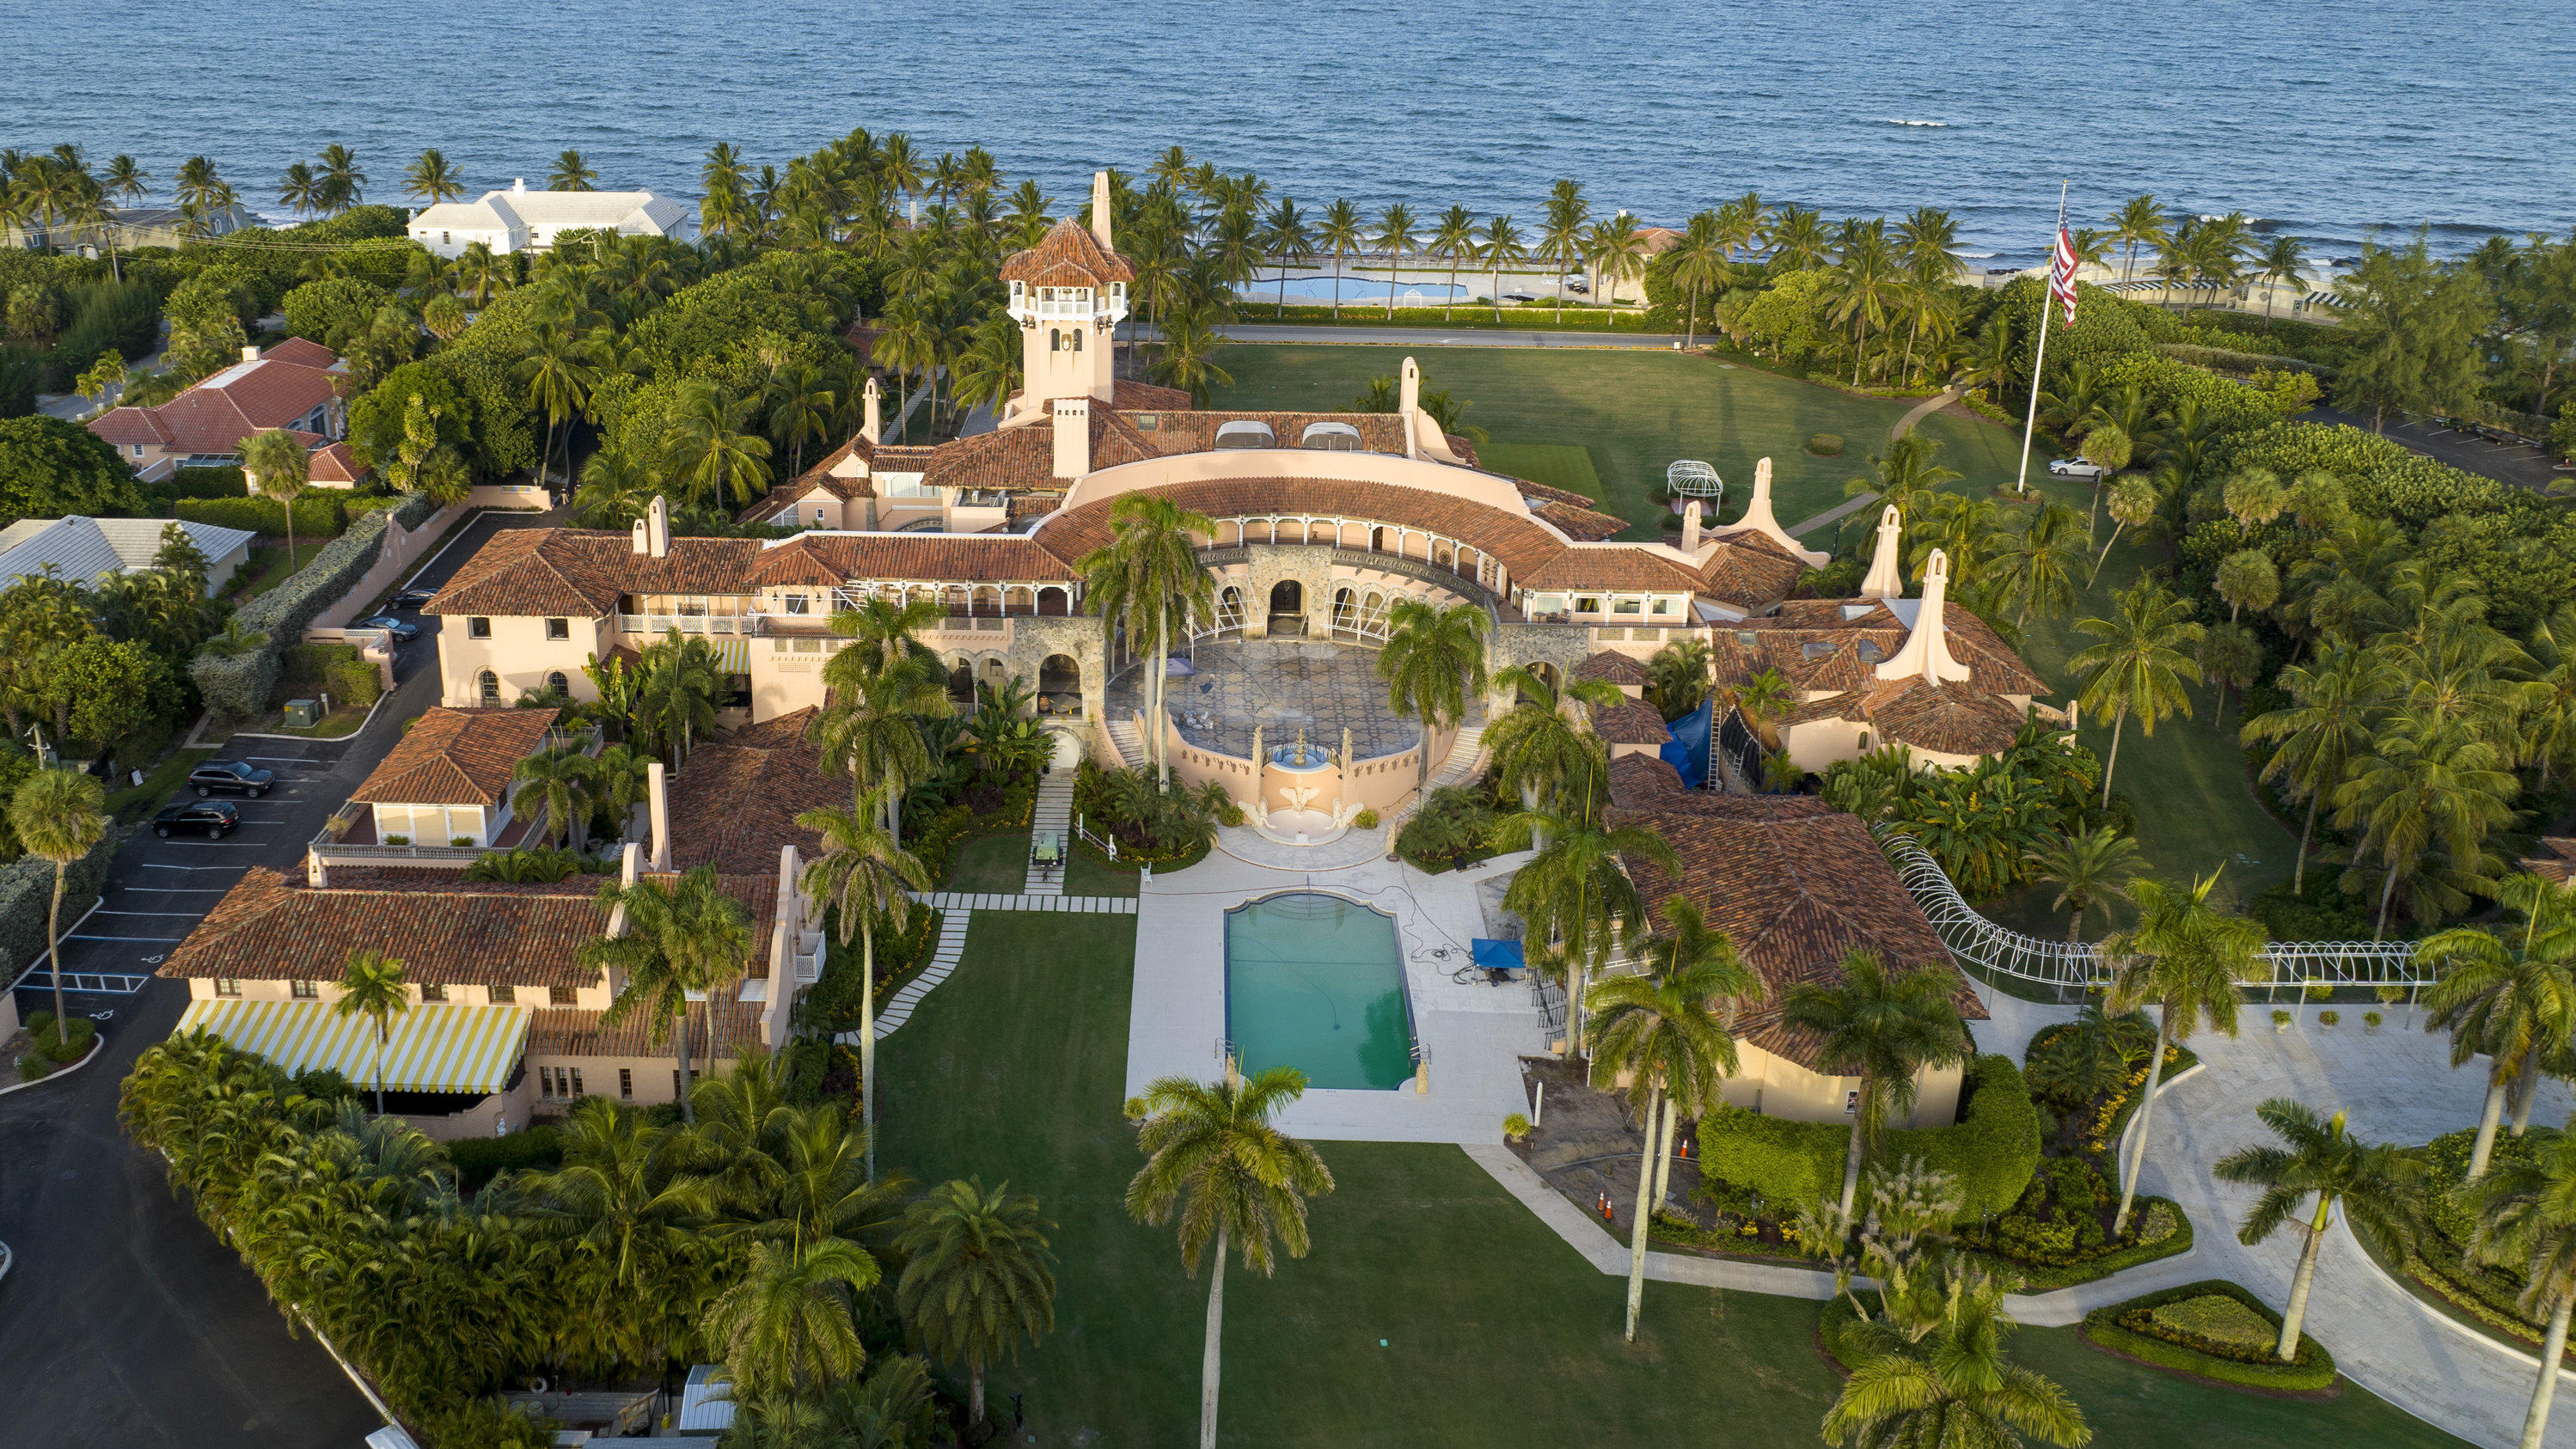 FILE - An aerial view of former President Donald Trump's Mar-a-Lago estate is seen, Aug. 10, 2022, in Palm Beach, Fla. Lawyers for Donald Trump were in court Friday, Dec. 9, for sealed arguments as part of the ongoing investigation into the presence 